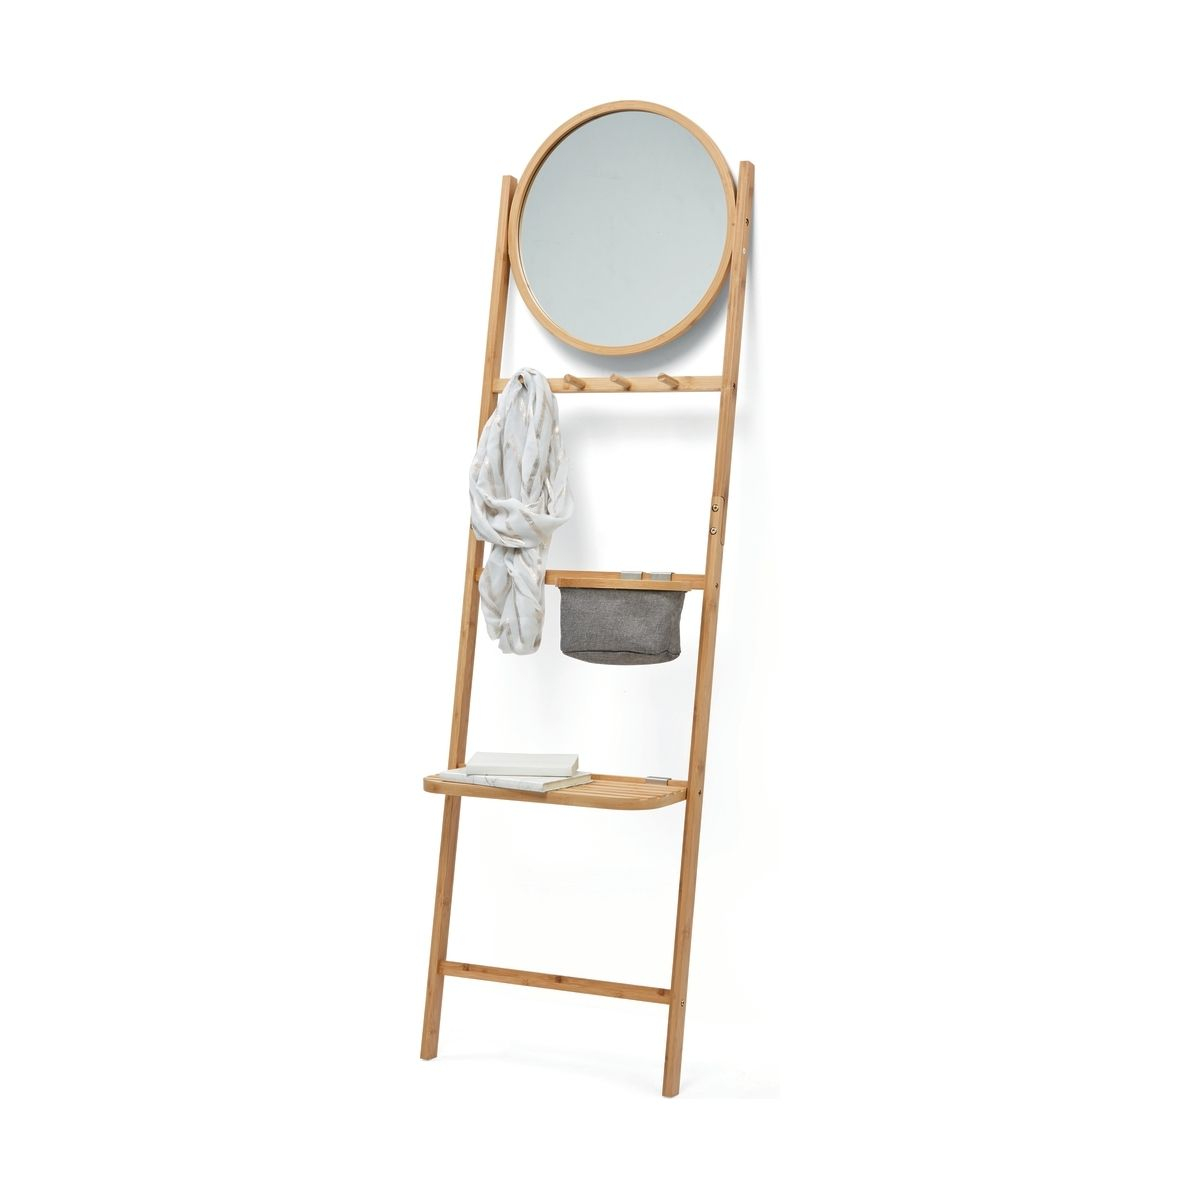 Leaning Storage Mirror With Bamboo Frame Kmart Storage with regard to size 1200 X 1200